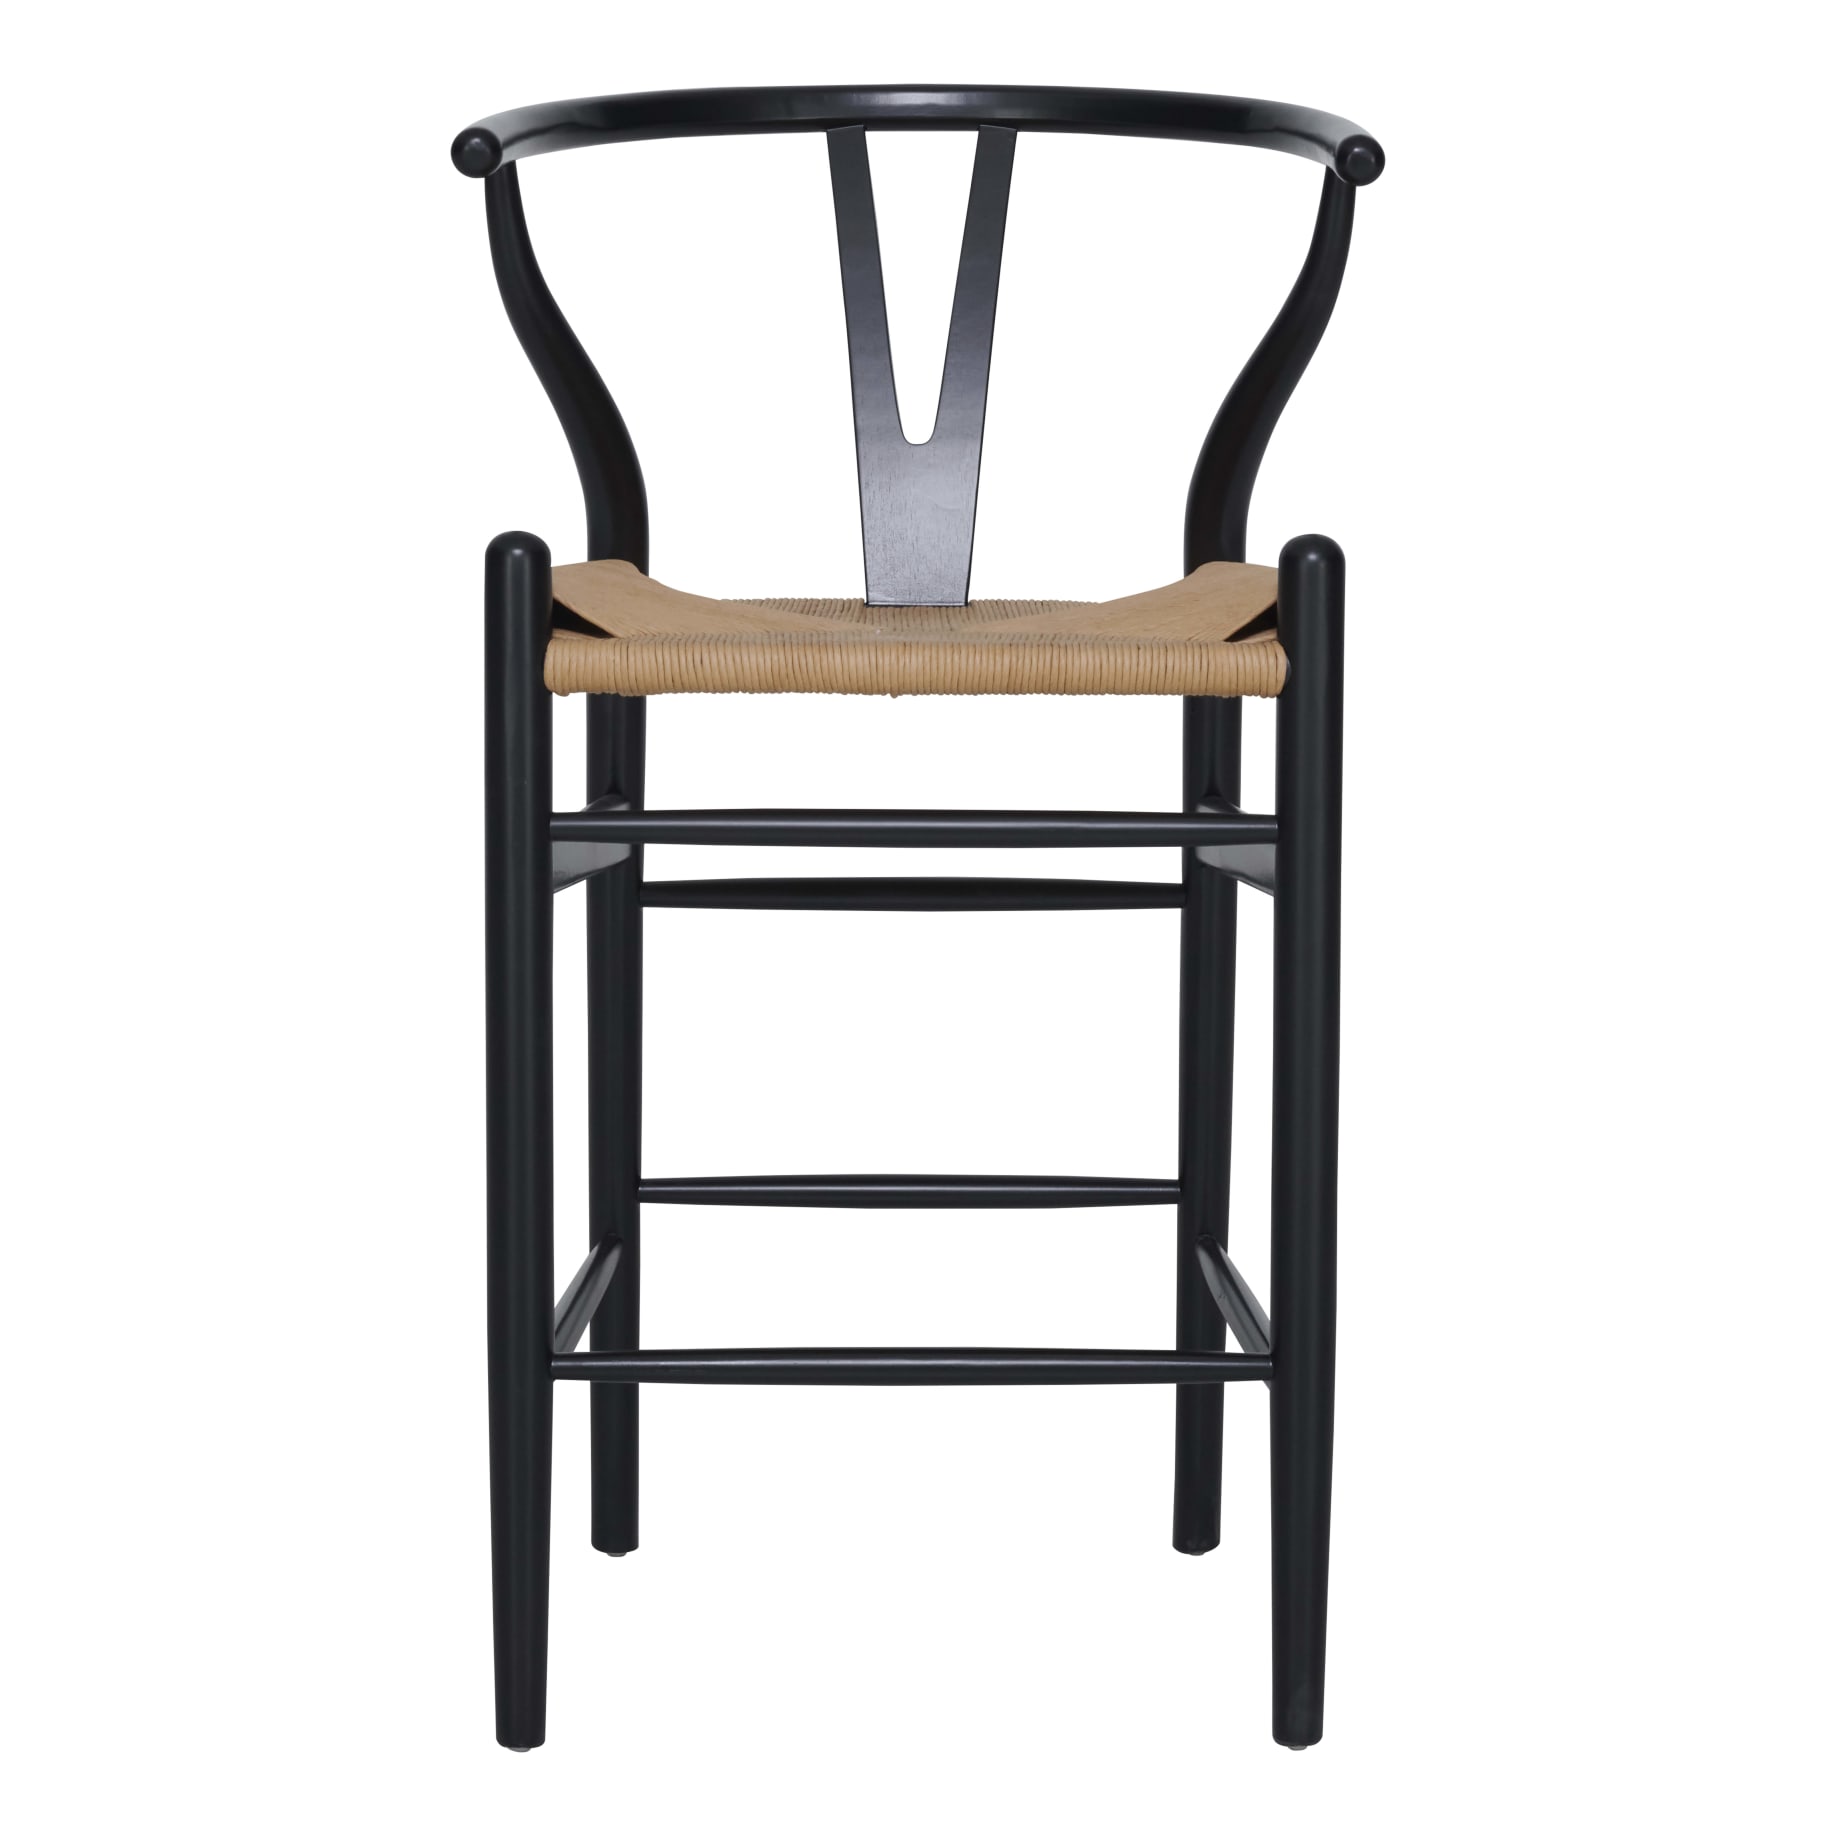 Megs Bar Chair in Black / Natural Seat